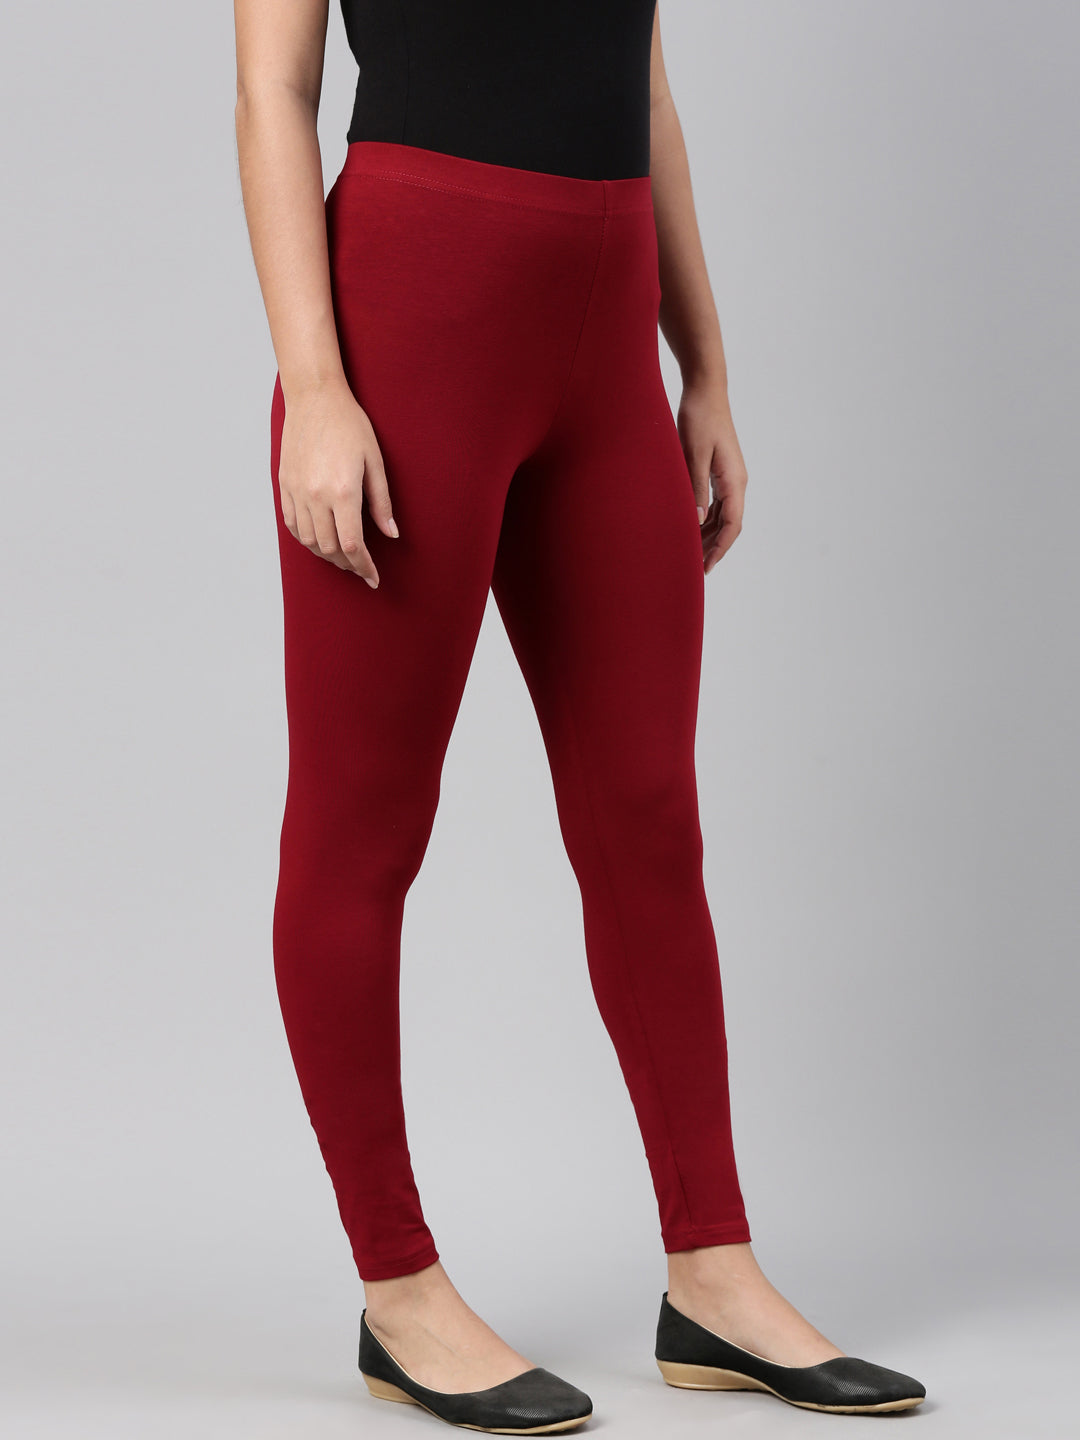 Go Colours in Iyyappanthangal,Chennai - Best Go Colors-Legging Retailers in  Chennai - Justdial